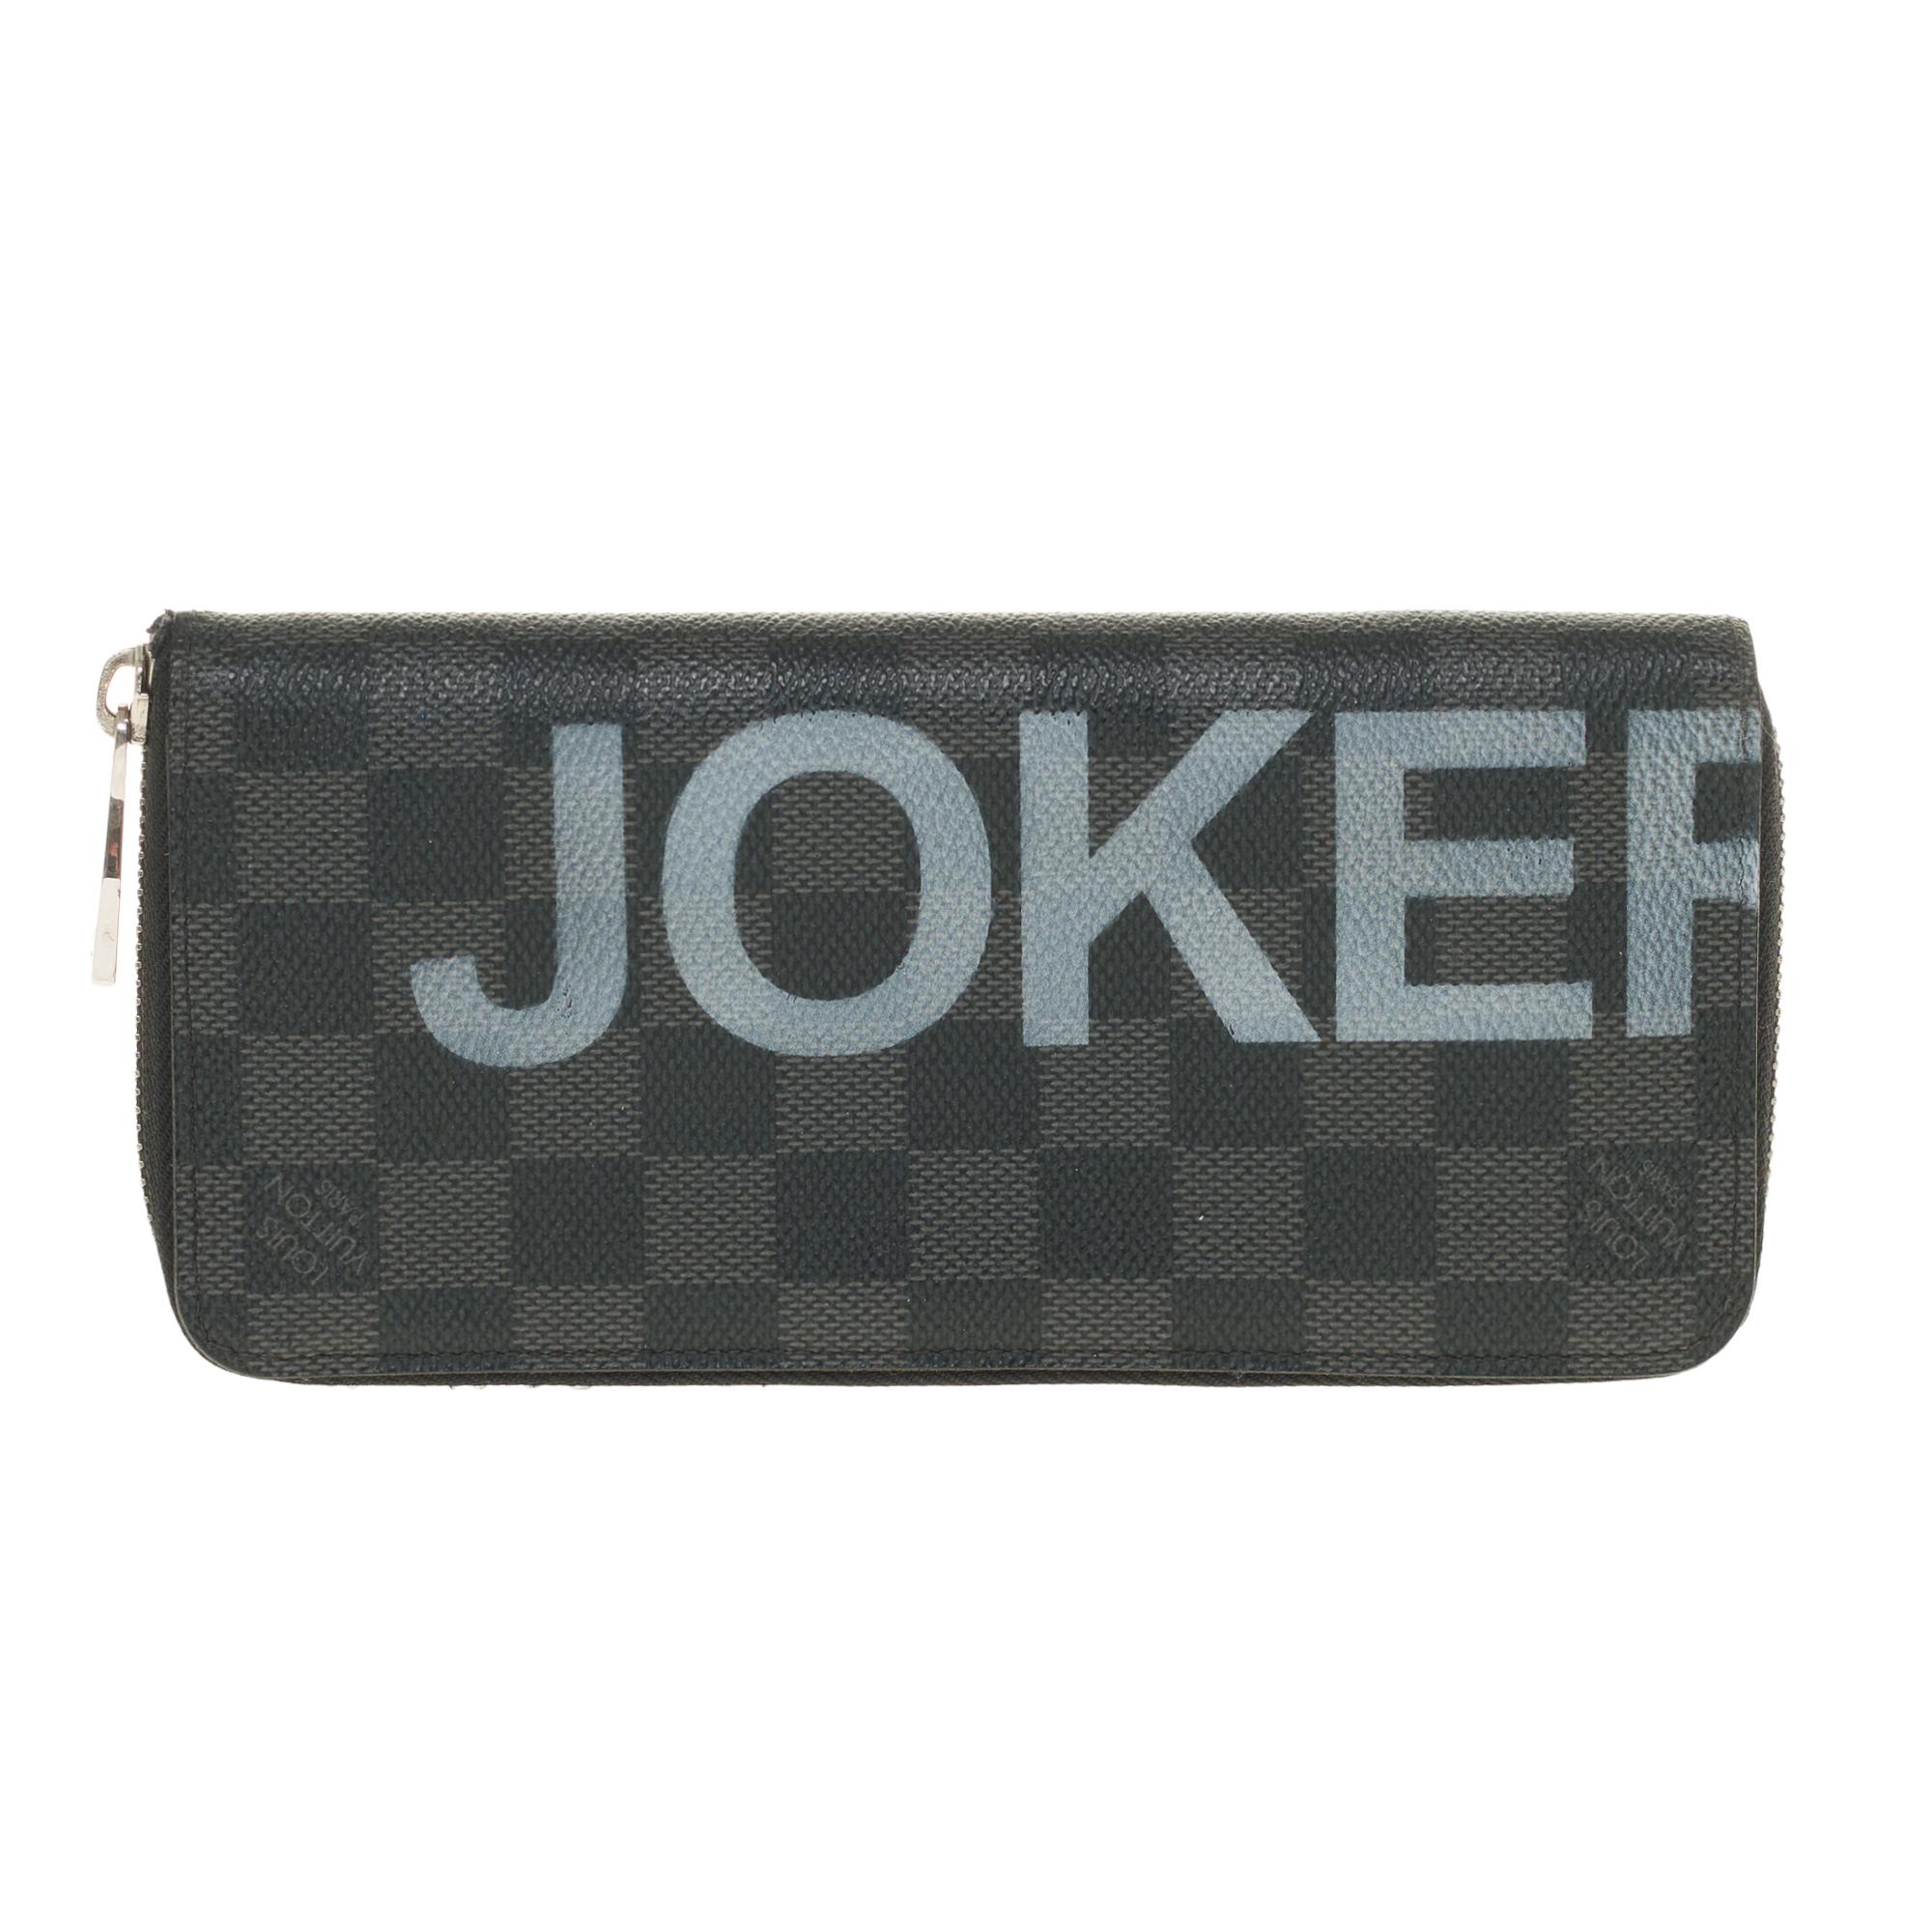 Houlux is pleased to present the latest creation of the artist specialized in Street'Art PatBo on the theme of Joker to make a unique portfolio that will surprise more than one!

The Zippy vertical wallet in resistant Damier Graphite canvas embodies